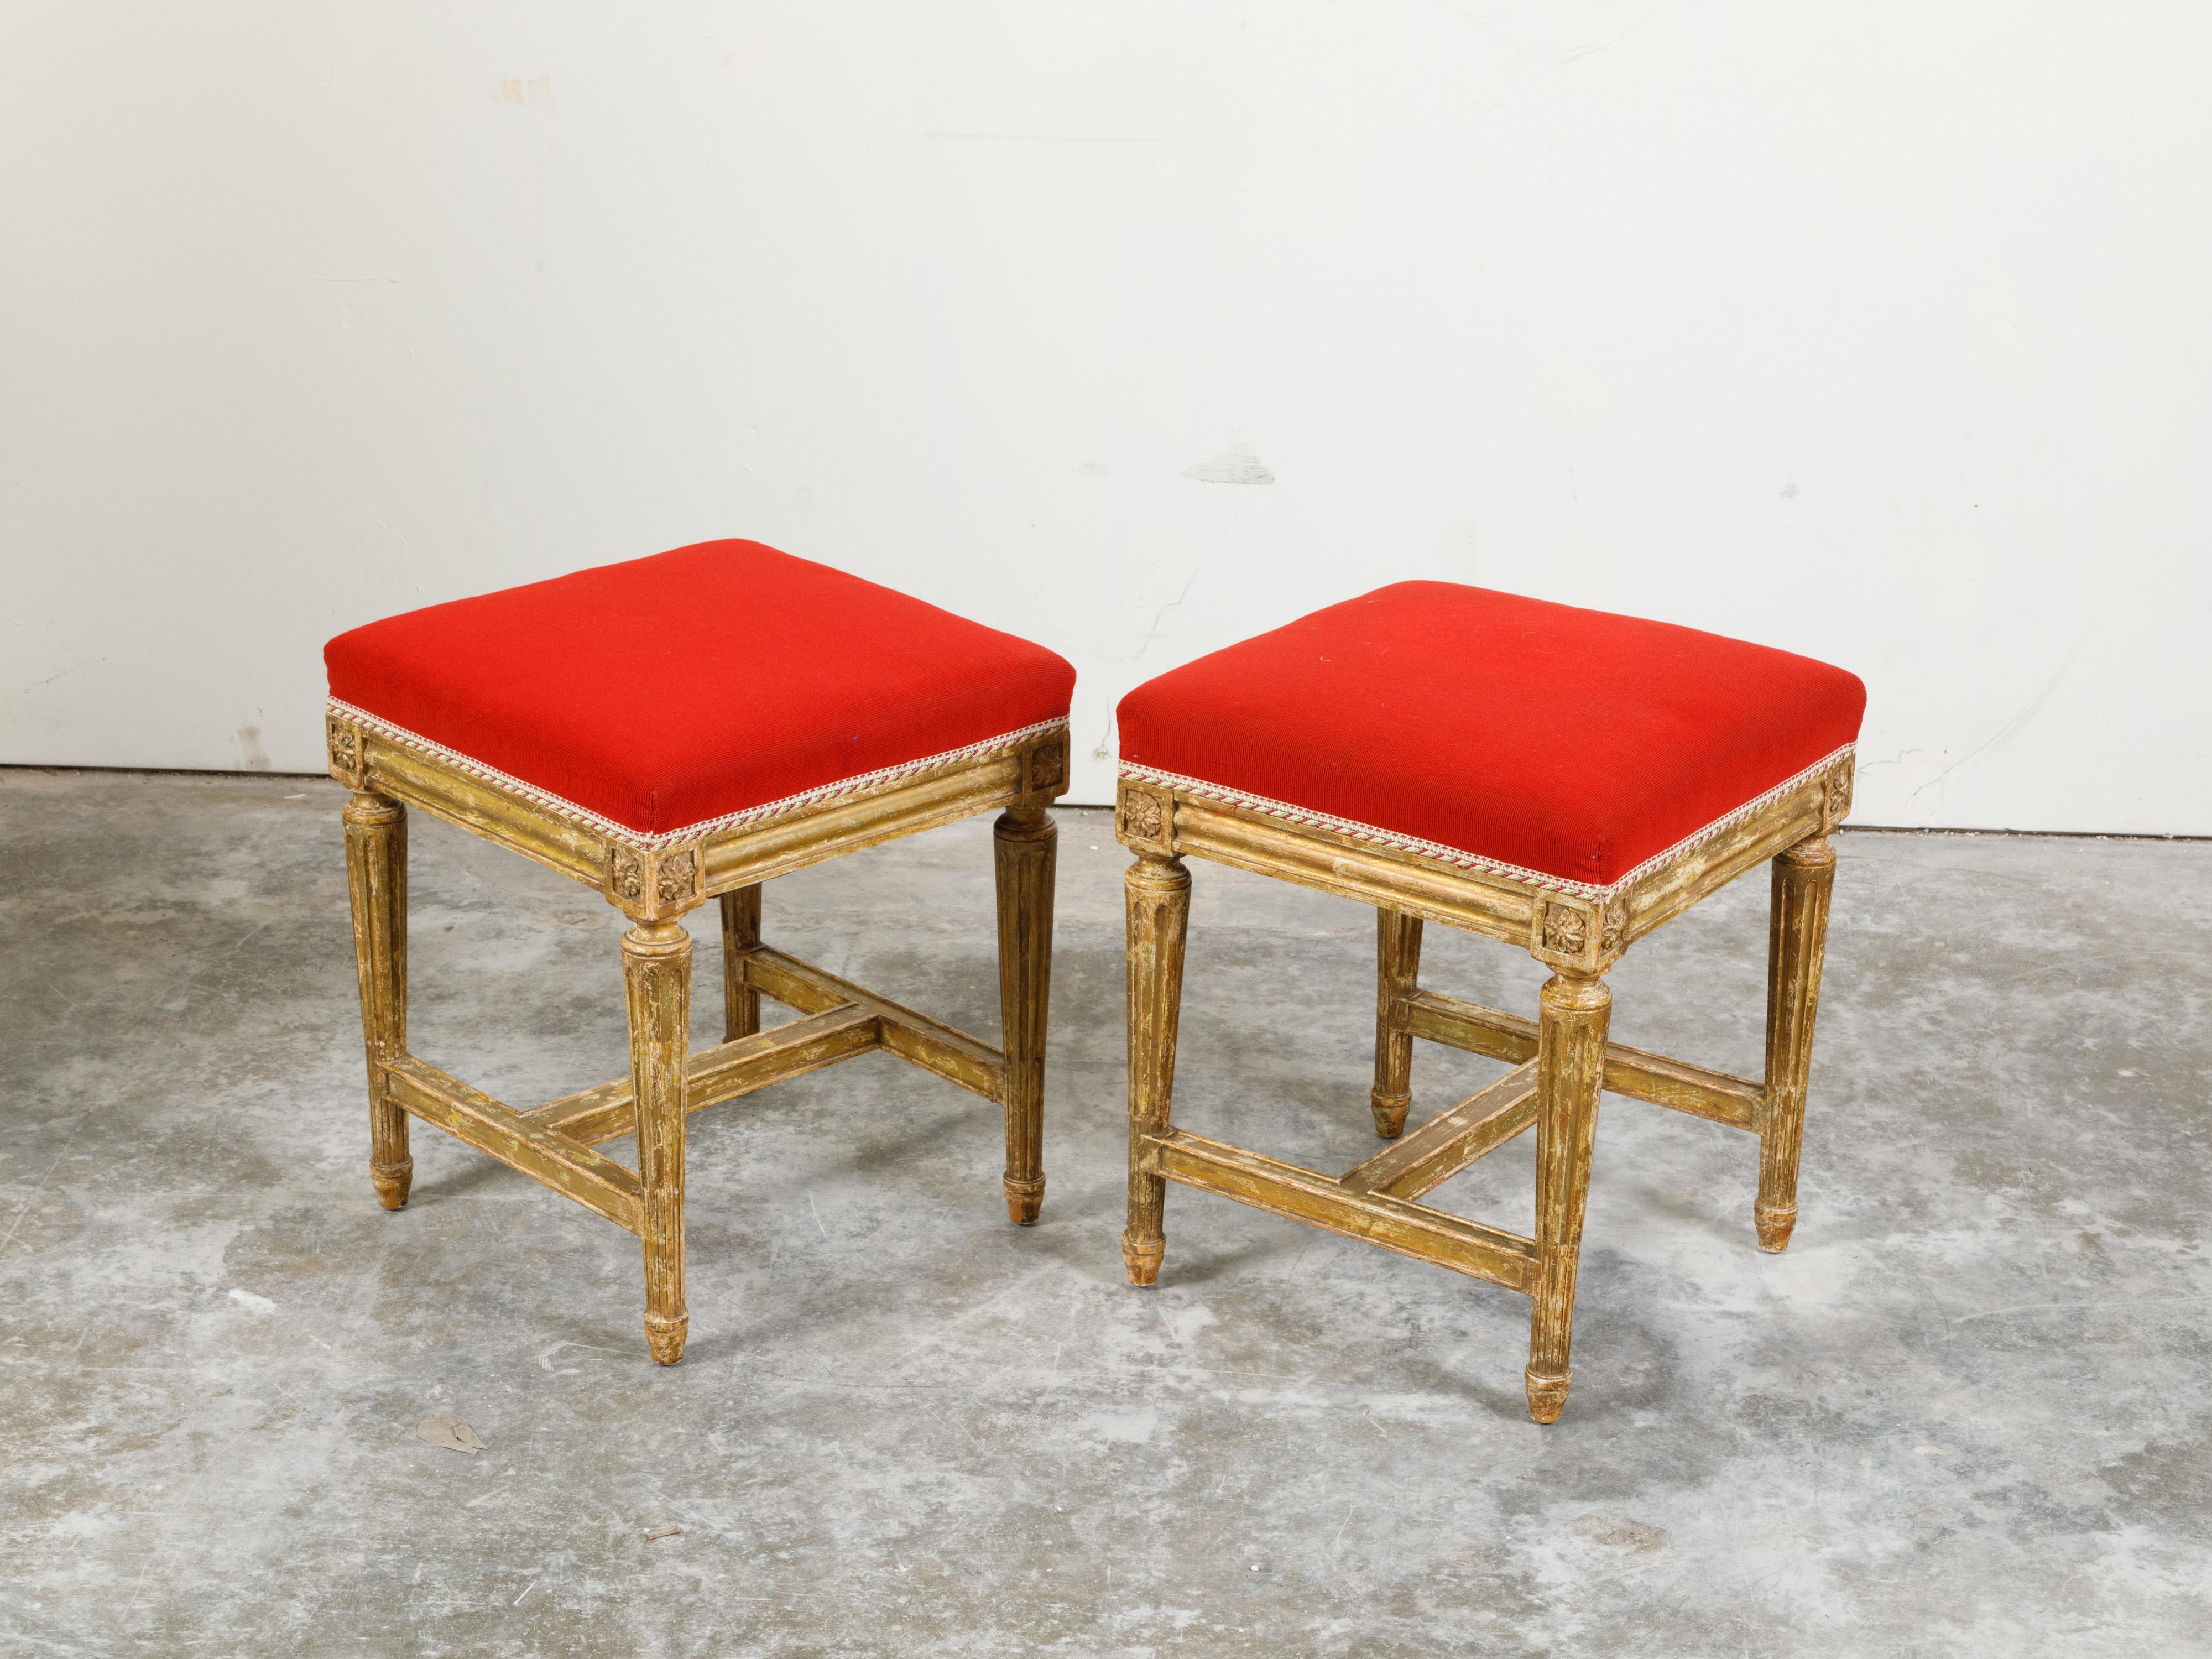 Pair of Neoclassical Style 19th Century Painted Stools with Red Upholstery For Sale 2